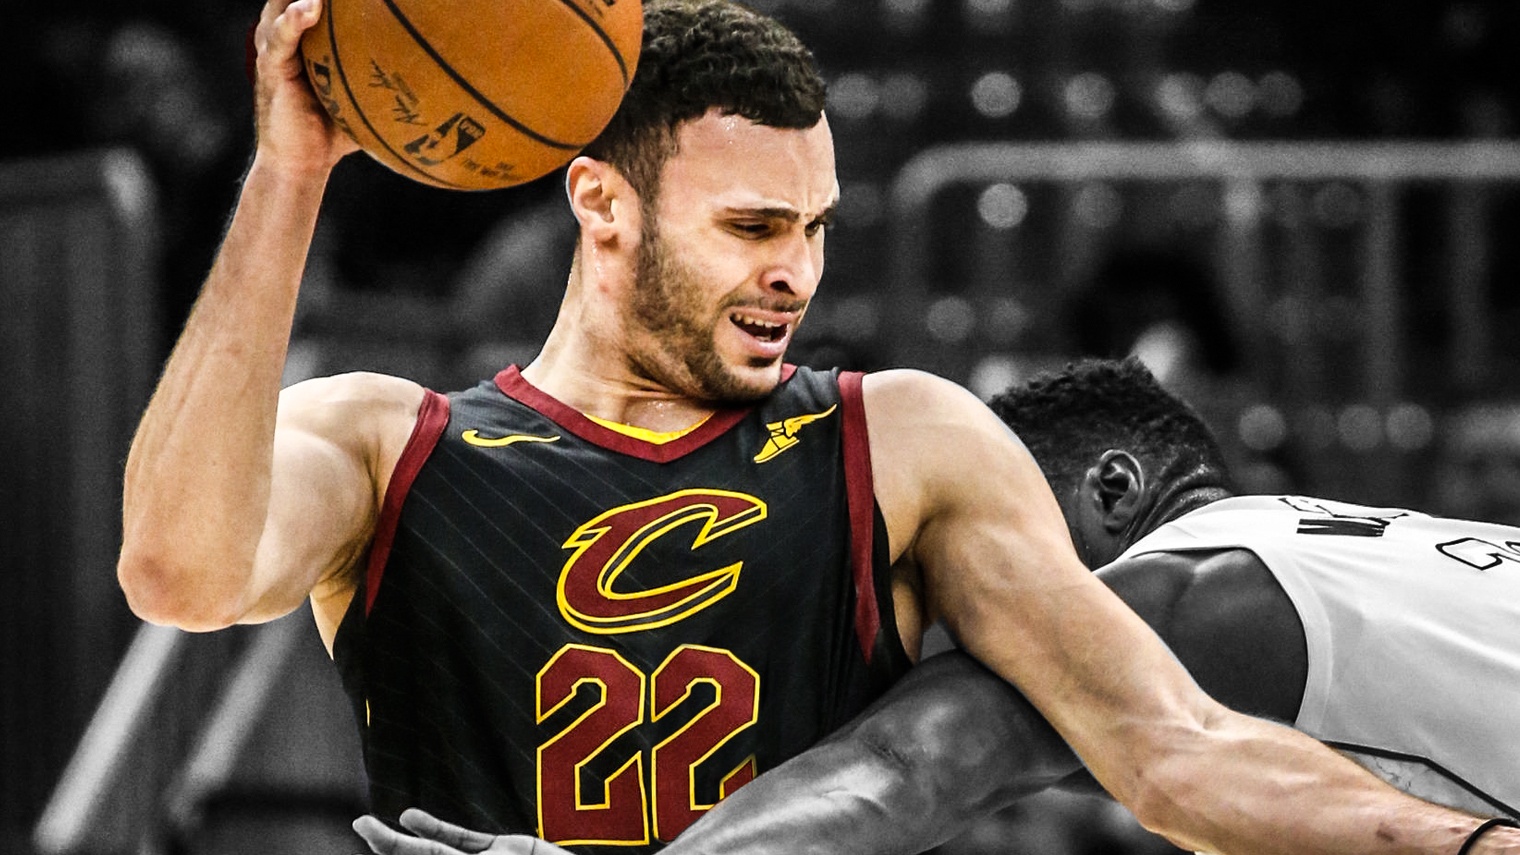 Larry Nance Jr. to wear his dad's retired No. 22 with Cavs 